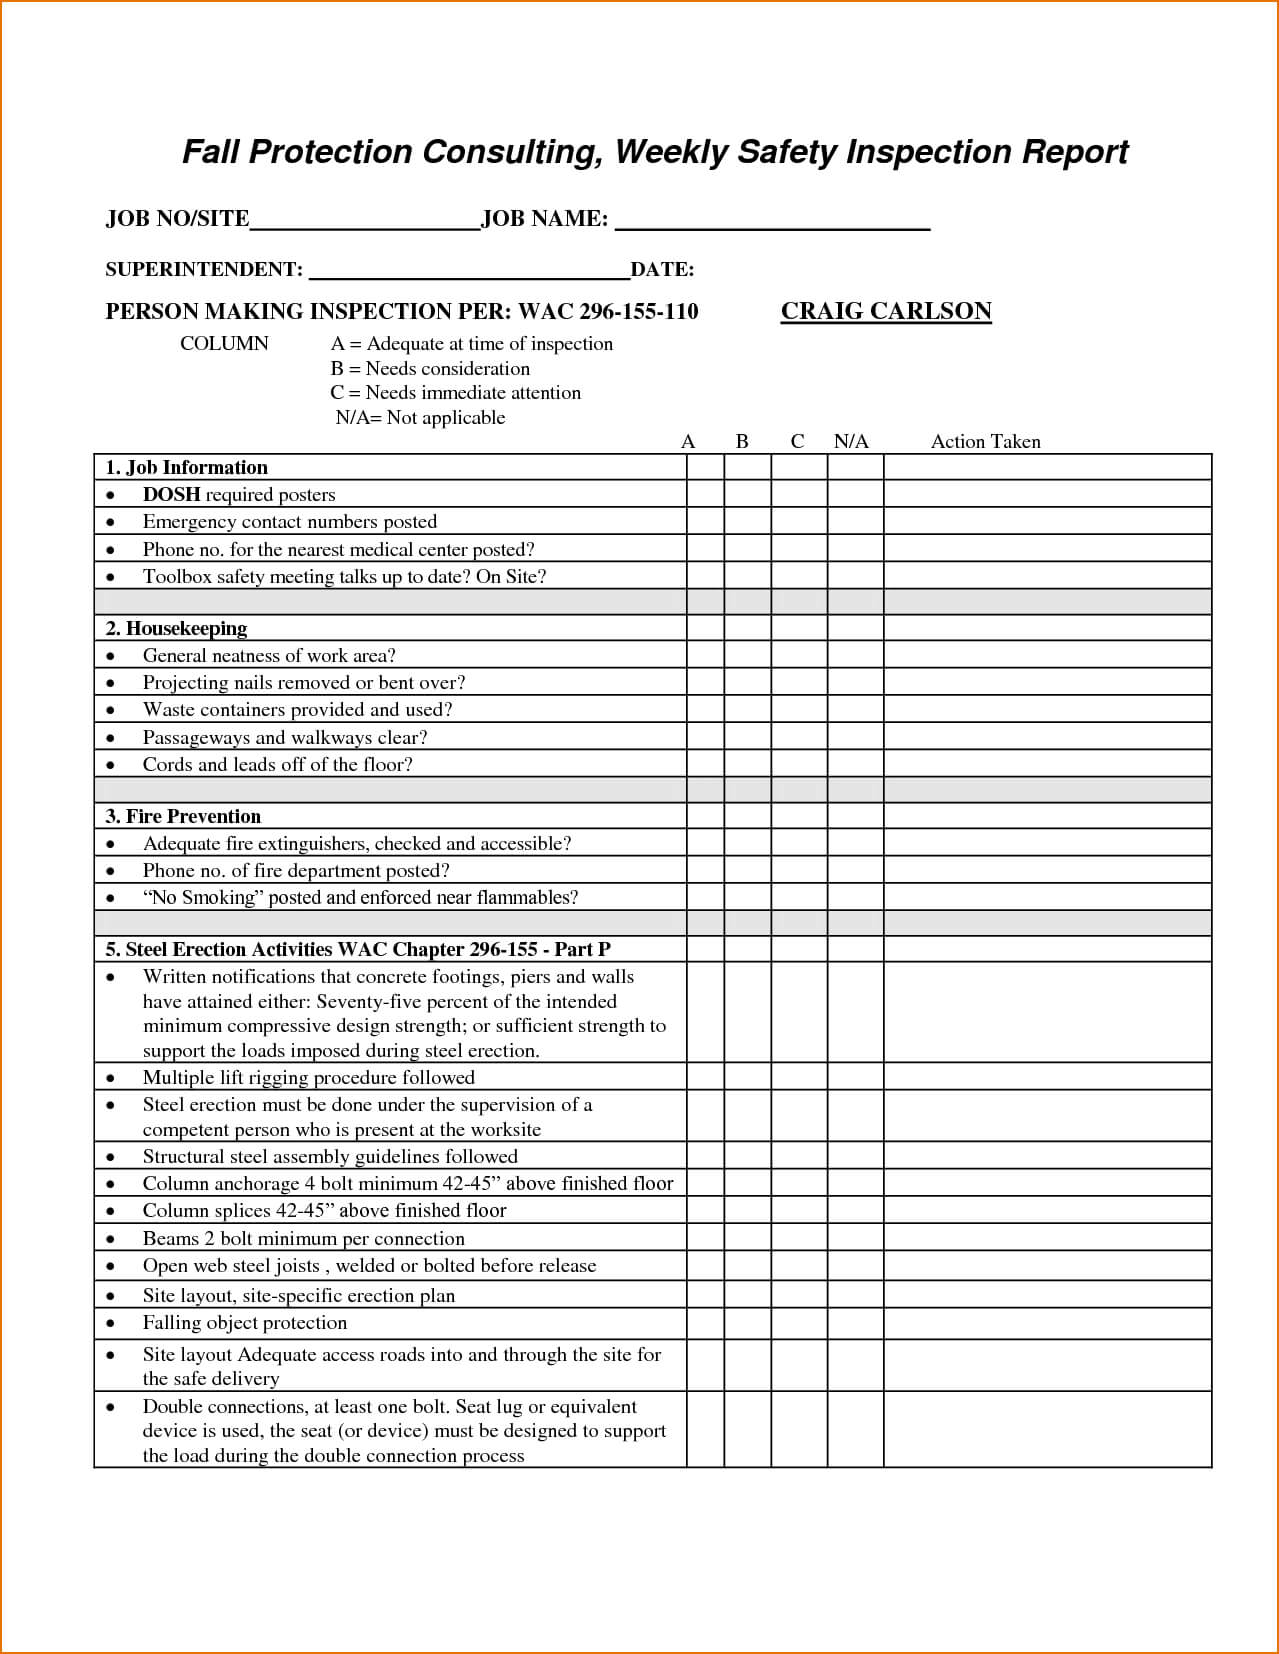 Annual Vehicle Inspection Report Template And Vehicle Safety Regarding Vehicle Inspection Report Template